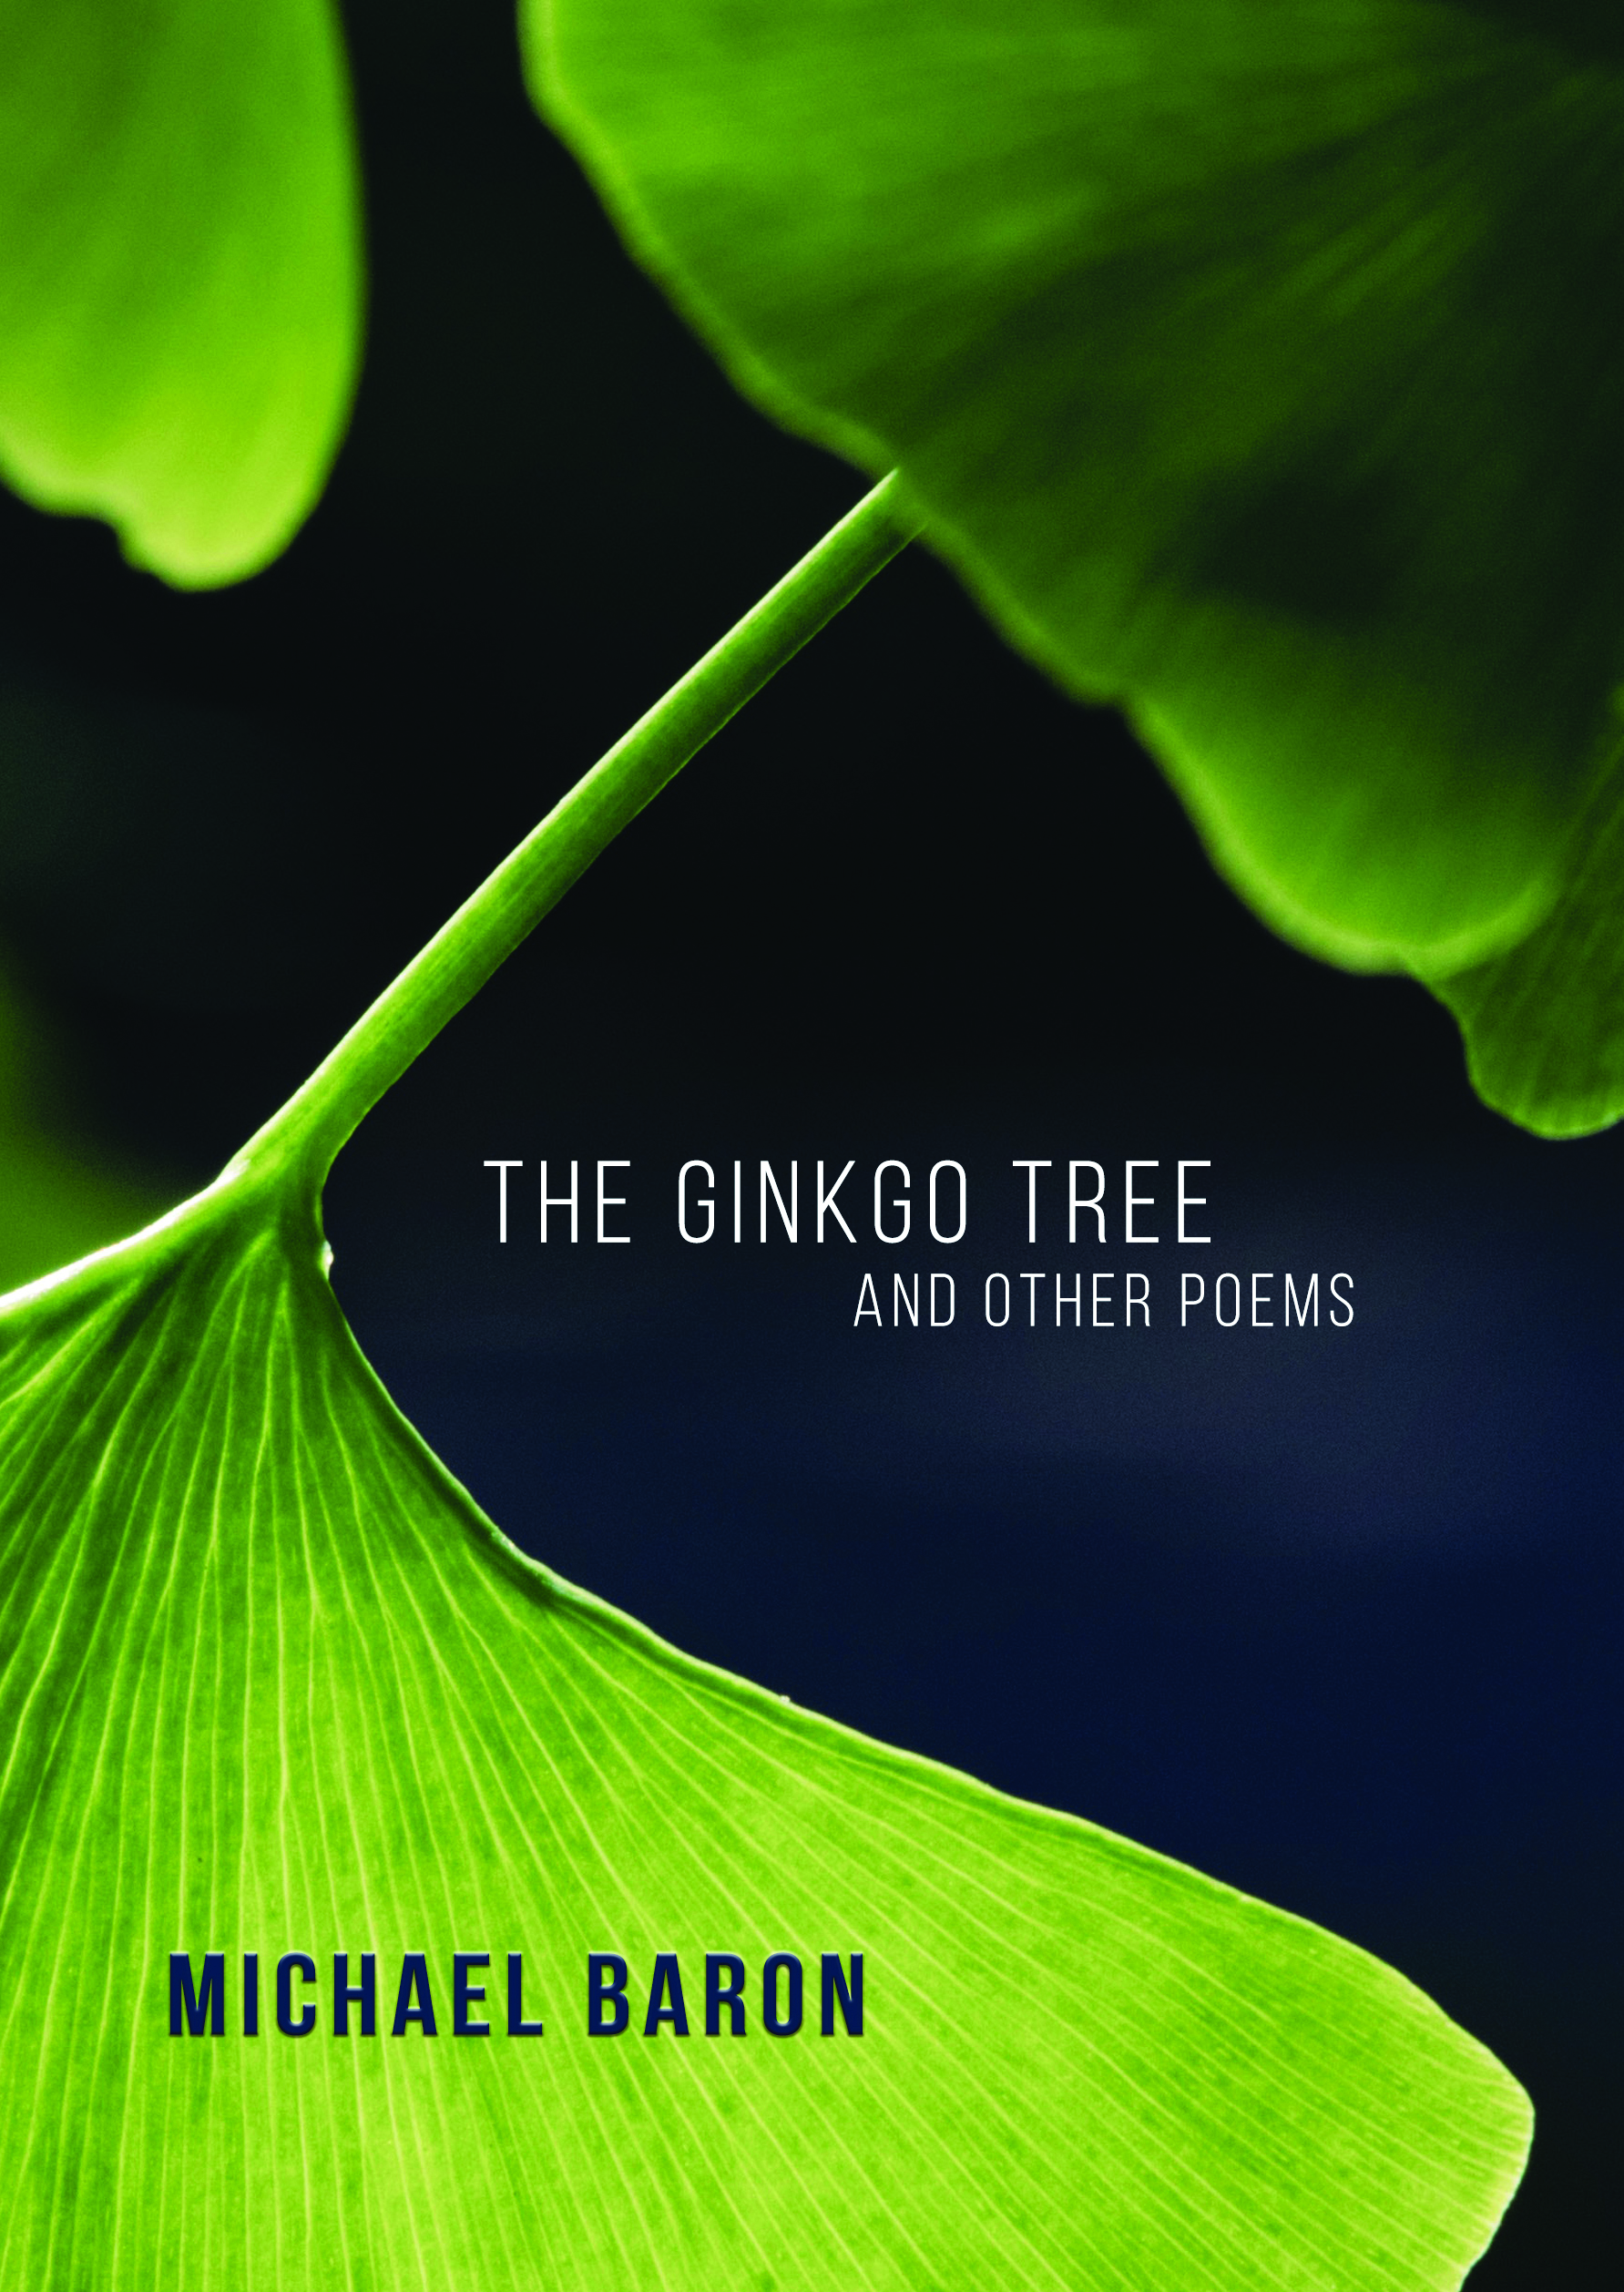 The Gingko Tree and Other Poems (designed by Ken Calhoun)